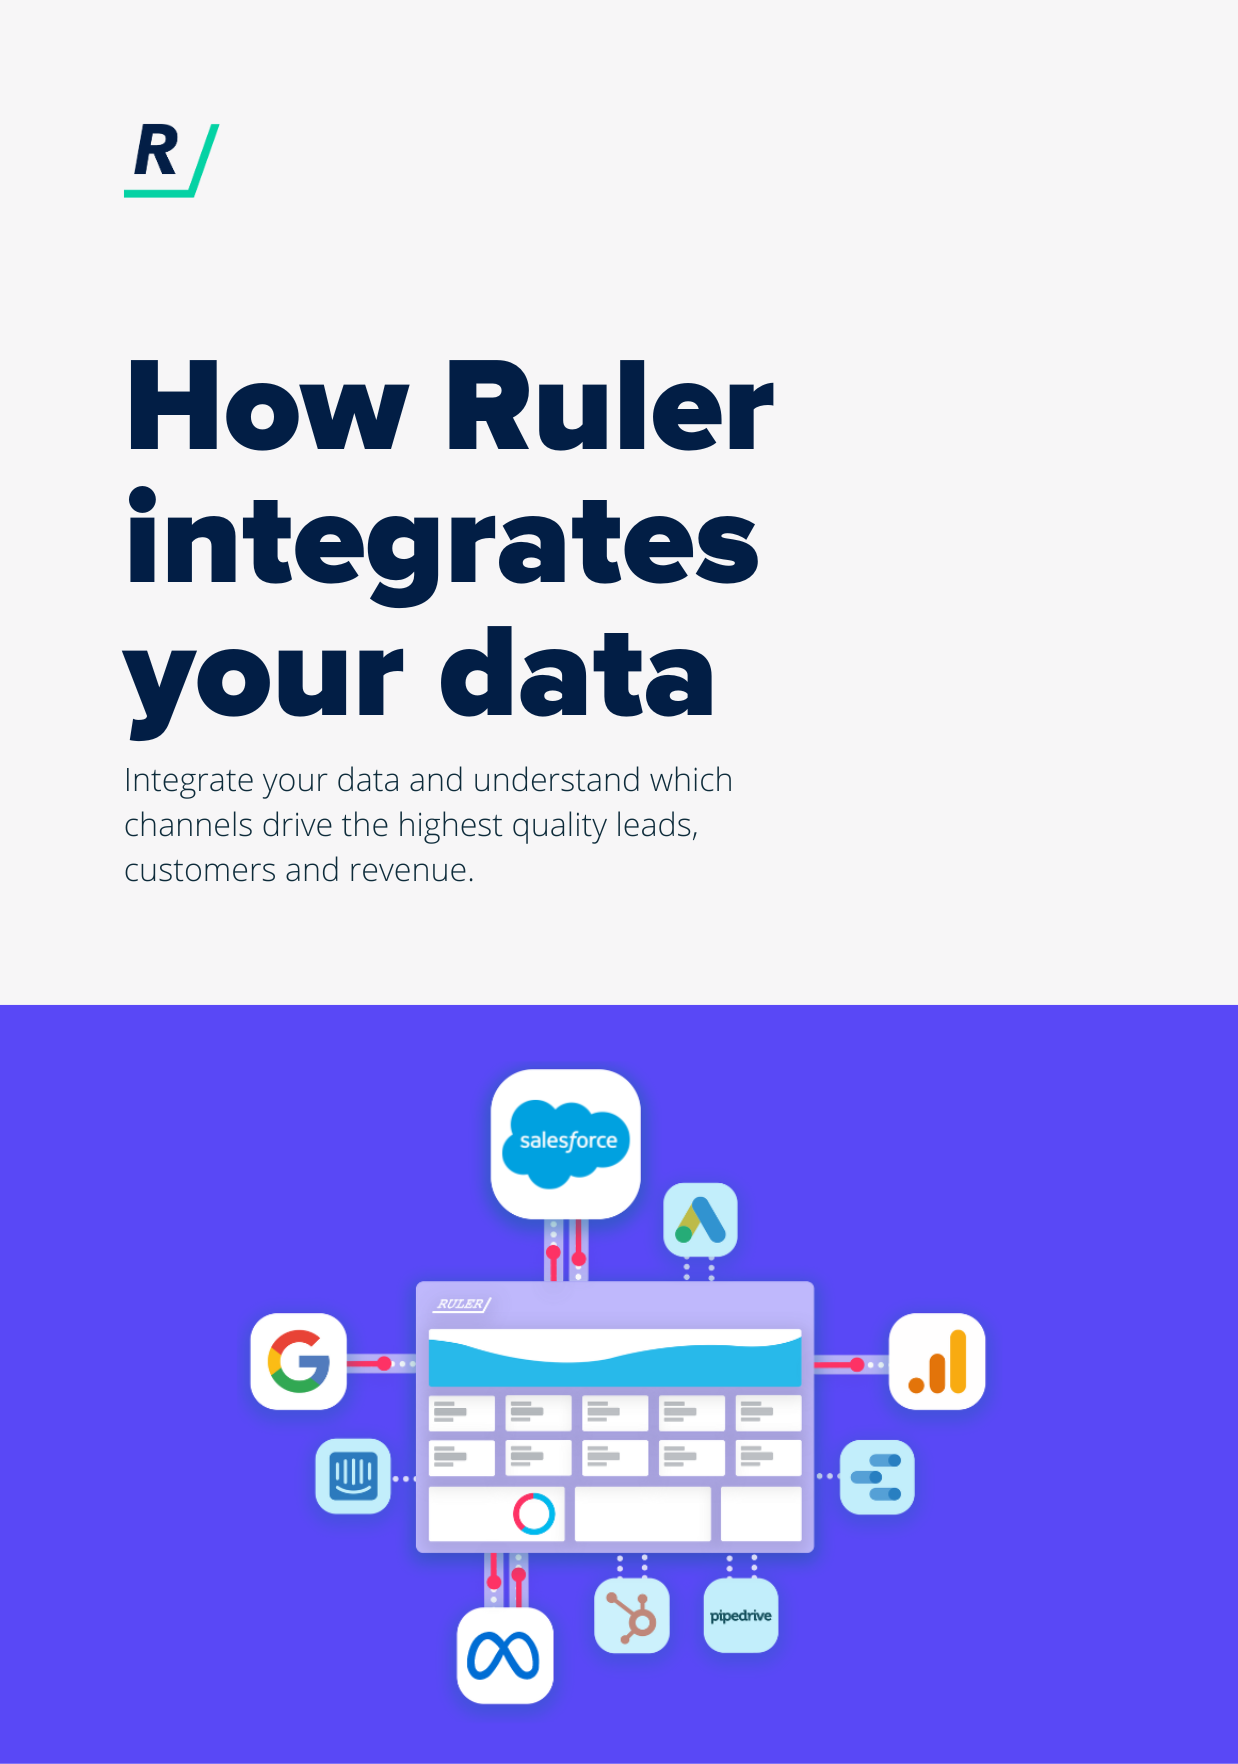 How Ruler integrates your data